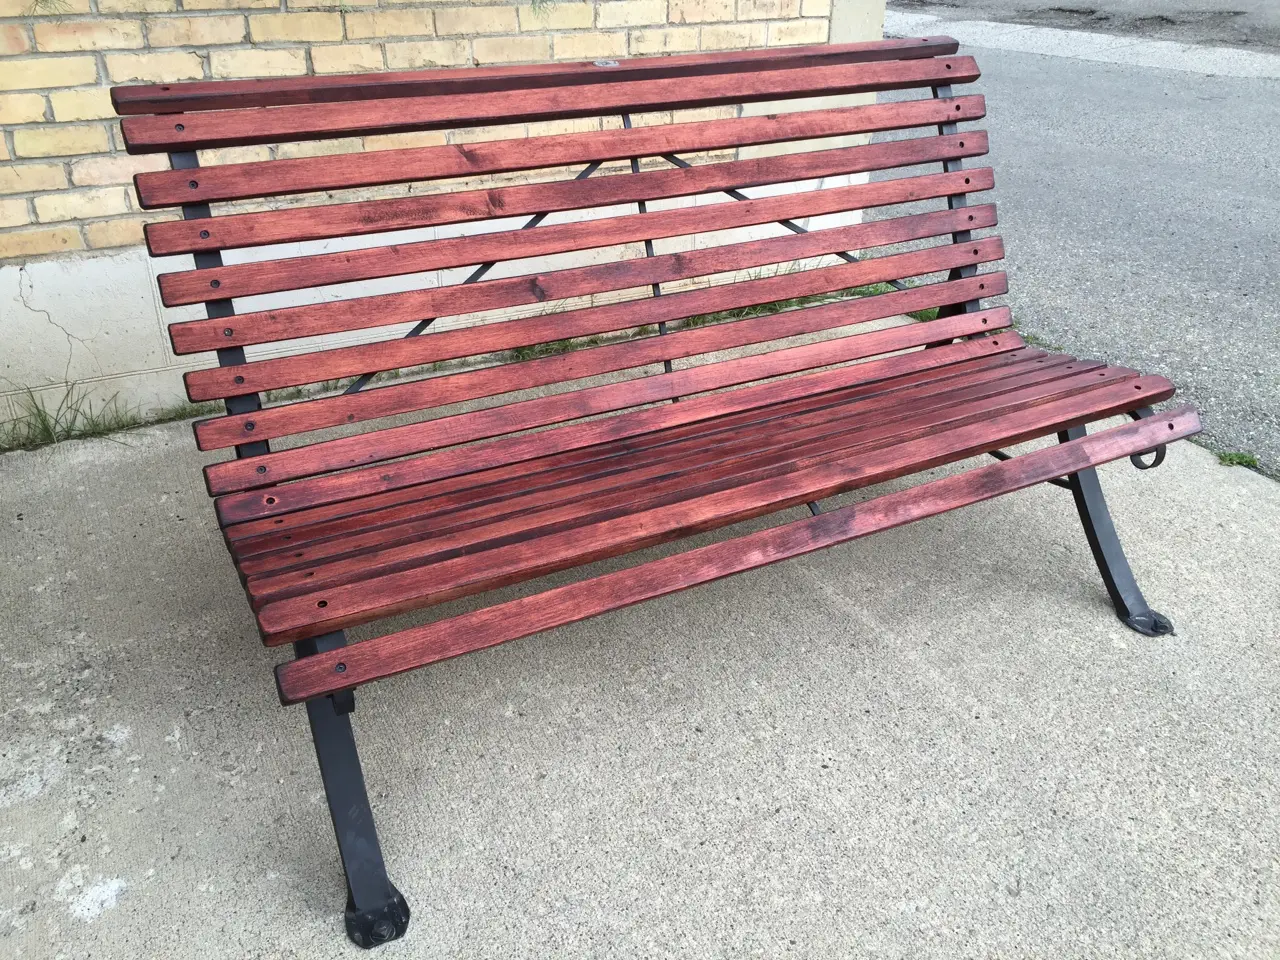 A wooden bench sitting on the side of a road.